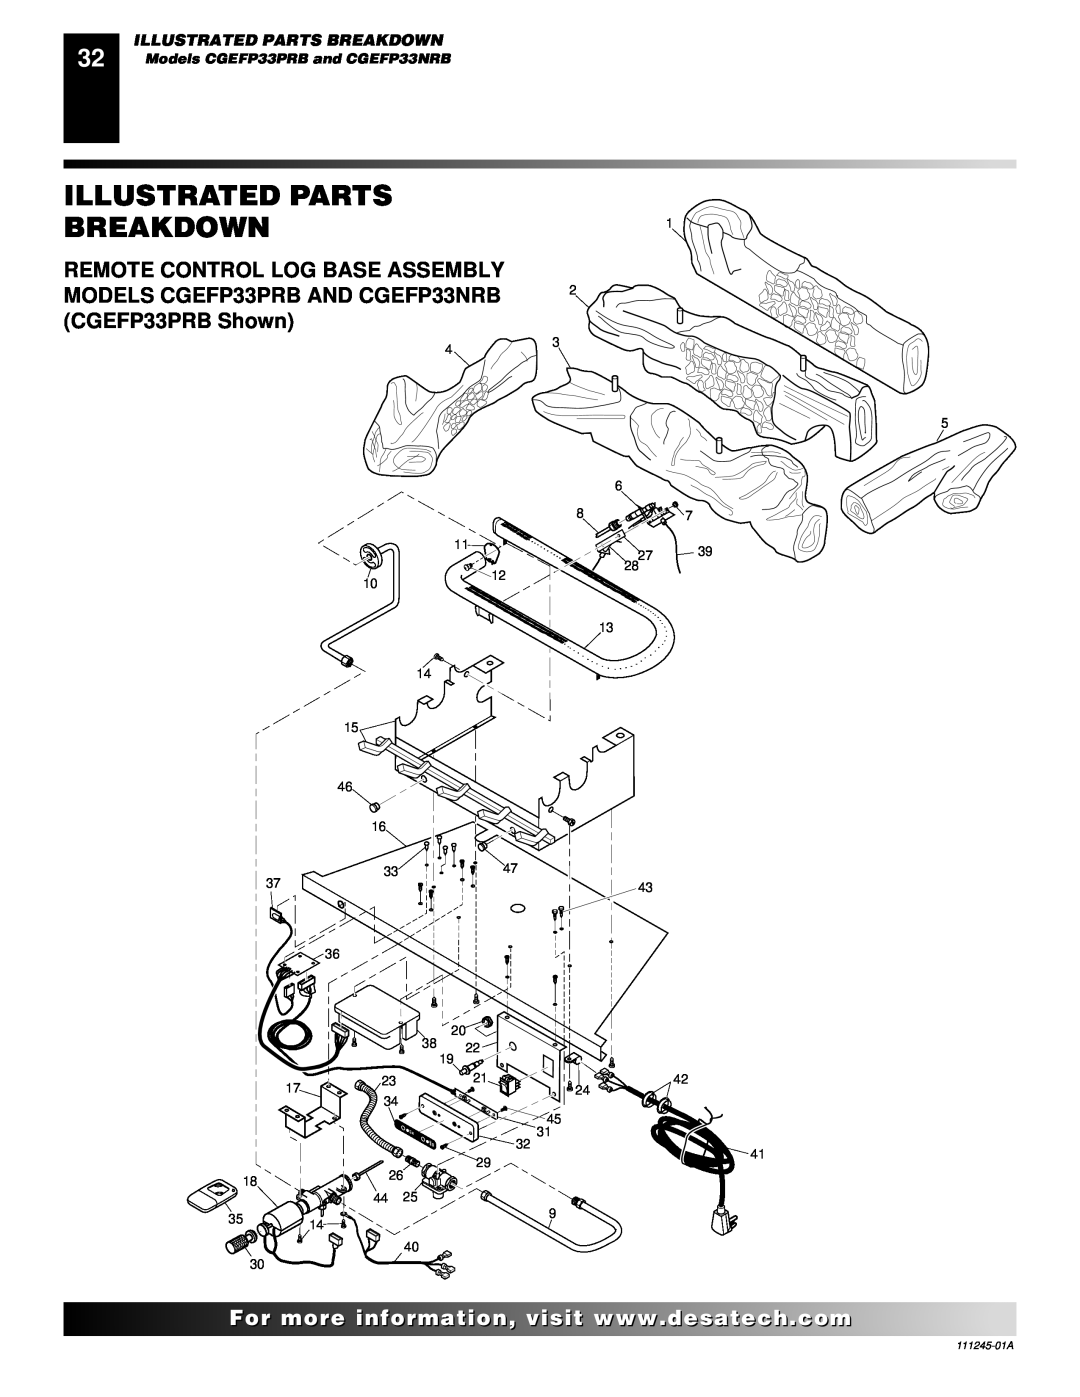 Desa installation manual Illustrated Parts Breakdown, Models CGEFP33PRB and CGEFP33NRB 